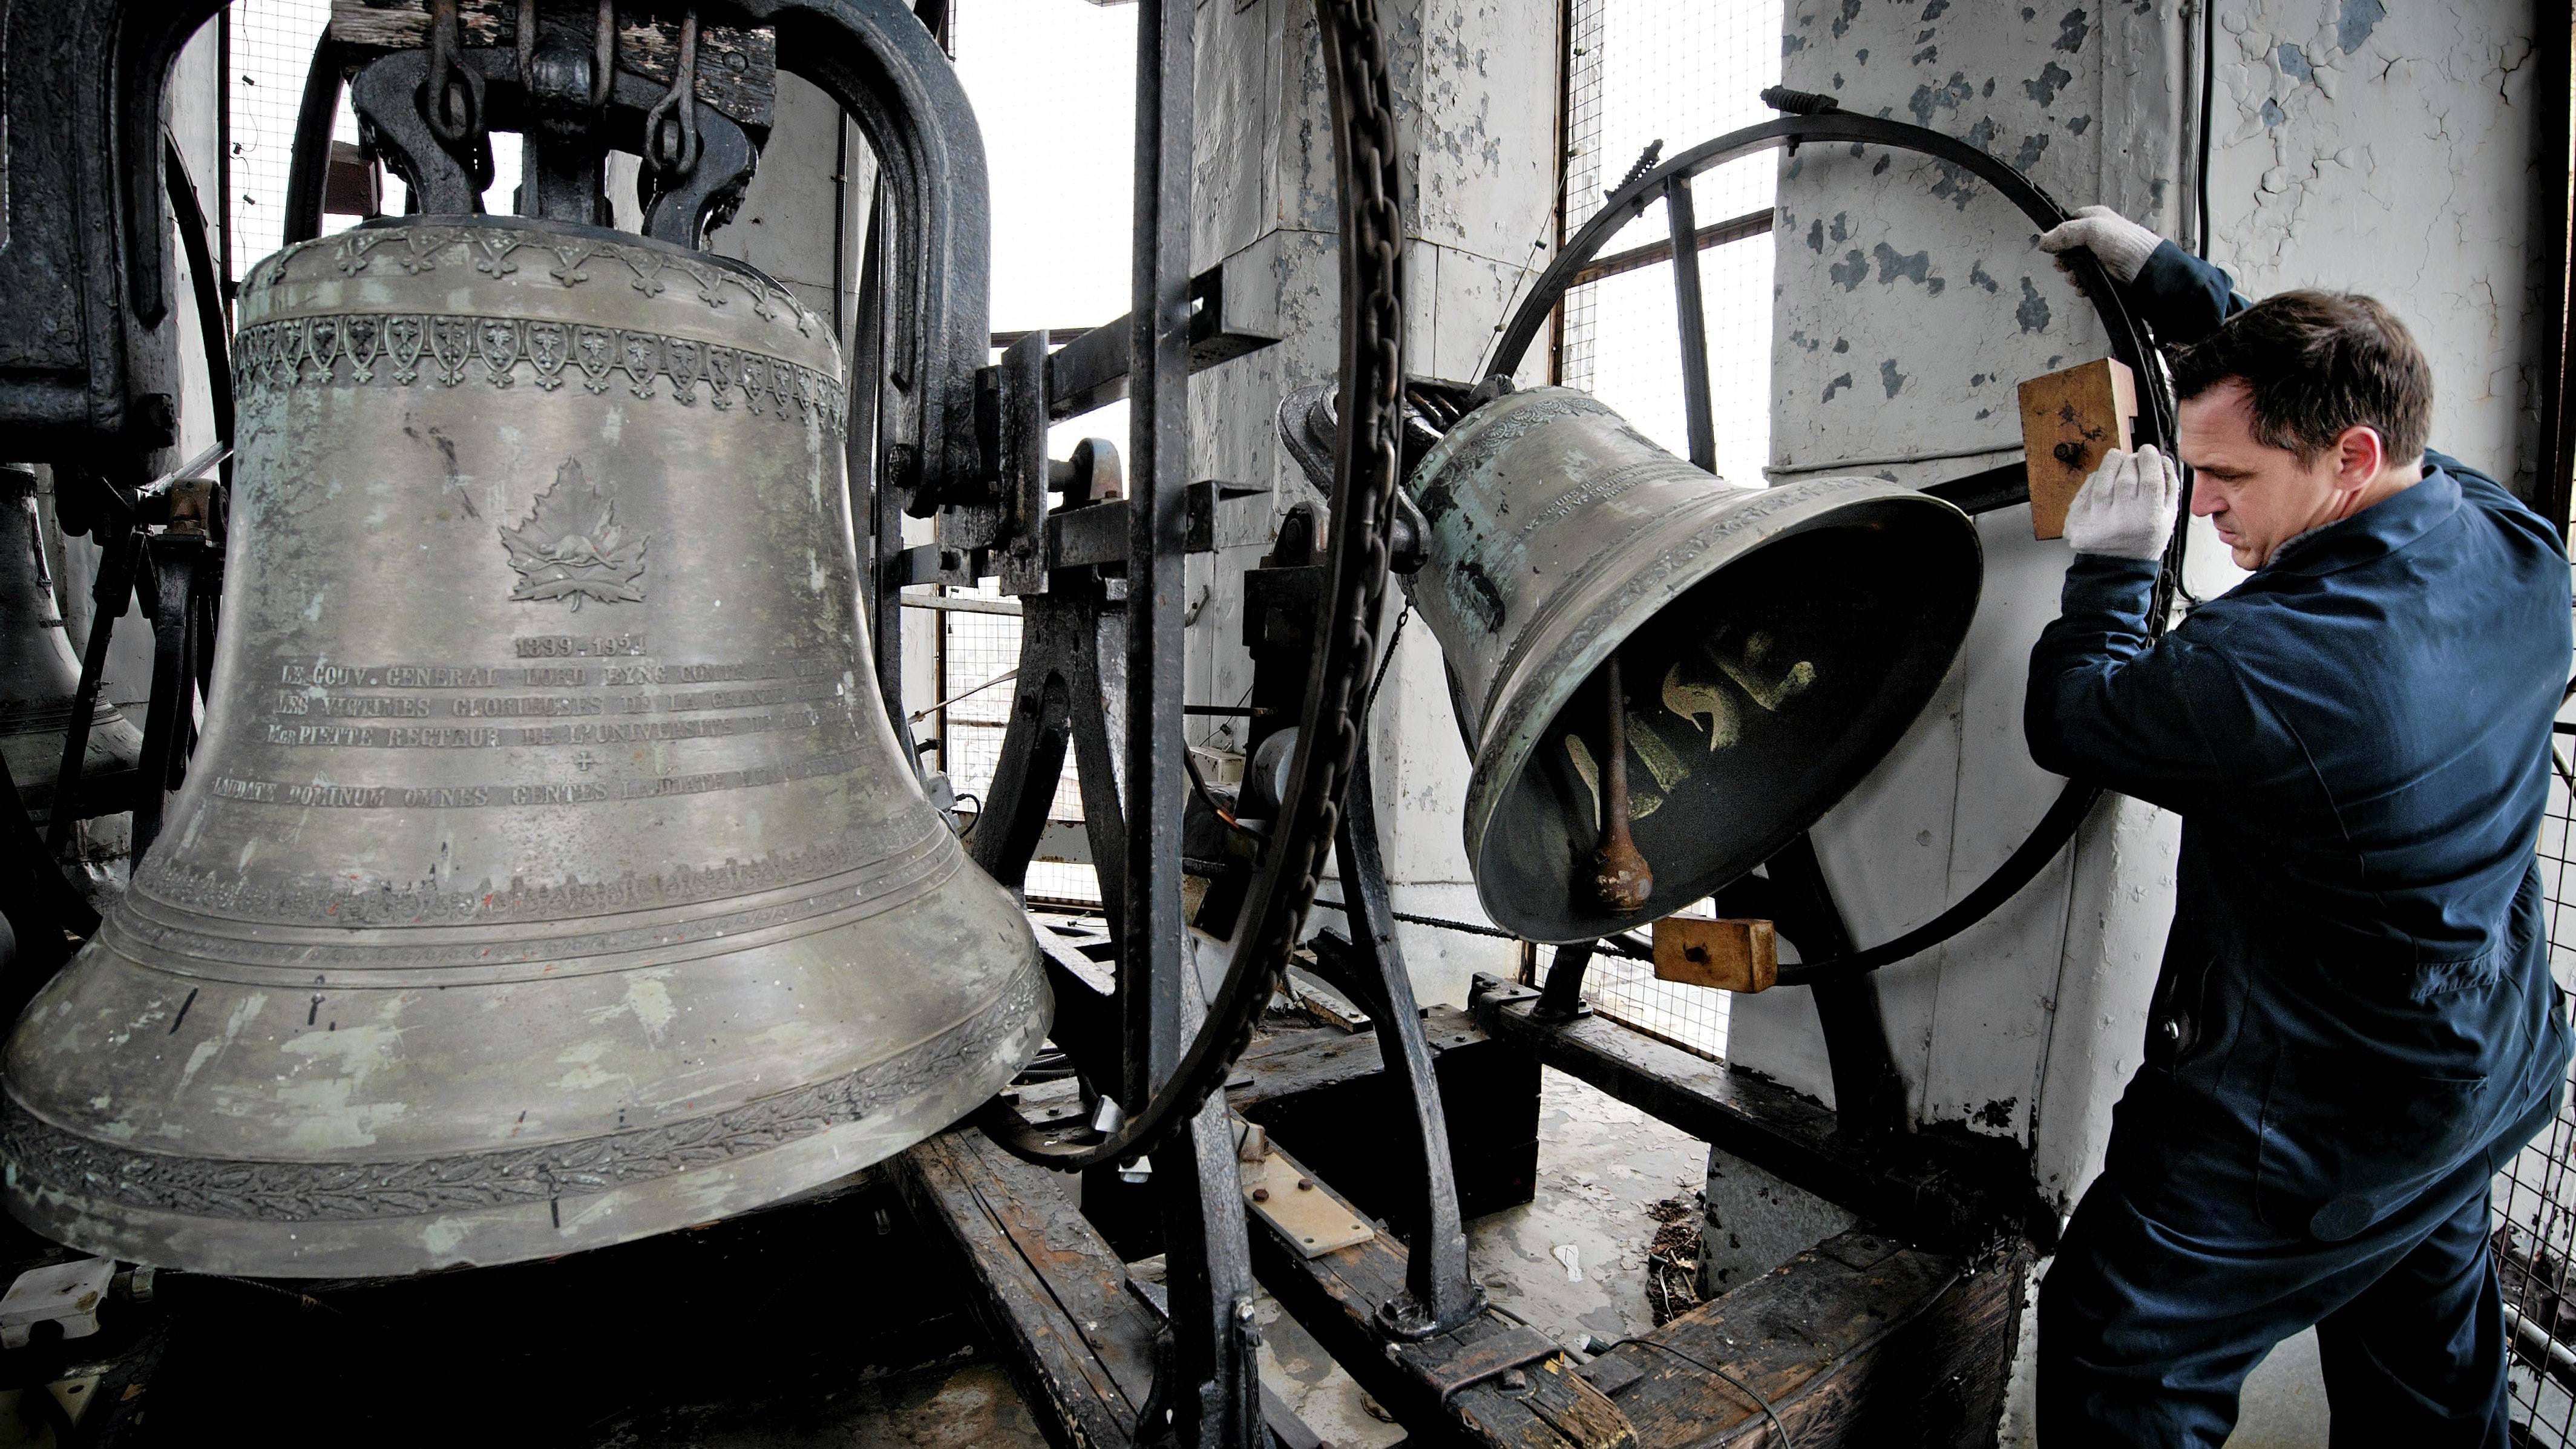 The man who keeps Quebec's church bells ring-a-linging - The Globe and Mail